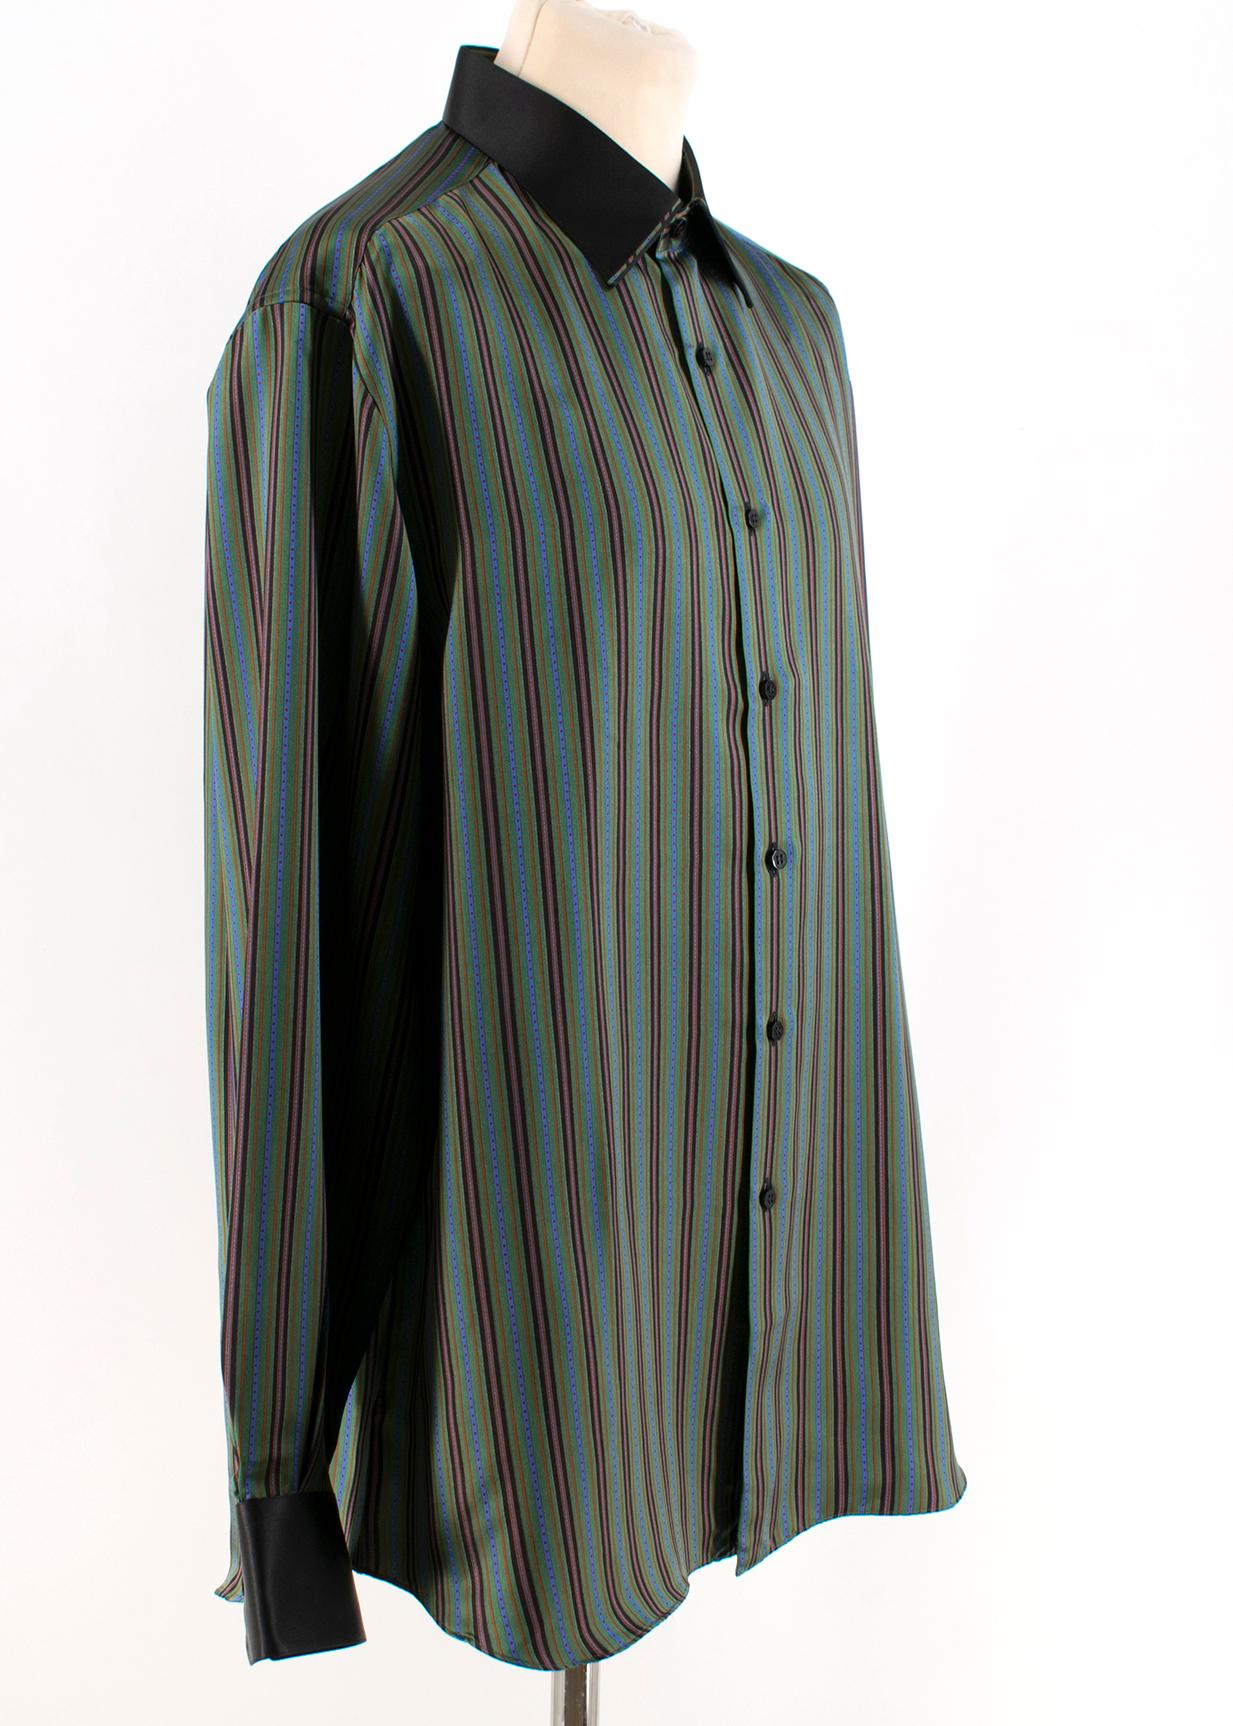 Stefano Ricci Green Multi Striped Silk Shirt 

- Green and Multi Colored Striped Shirt 
- 100% Silk 
- Black stiff point collar and sleeves 
- Black buttoned down center front and sleeves 

Please note, these items are pre-owned and may show some